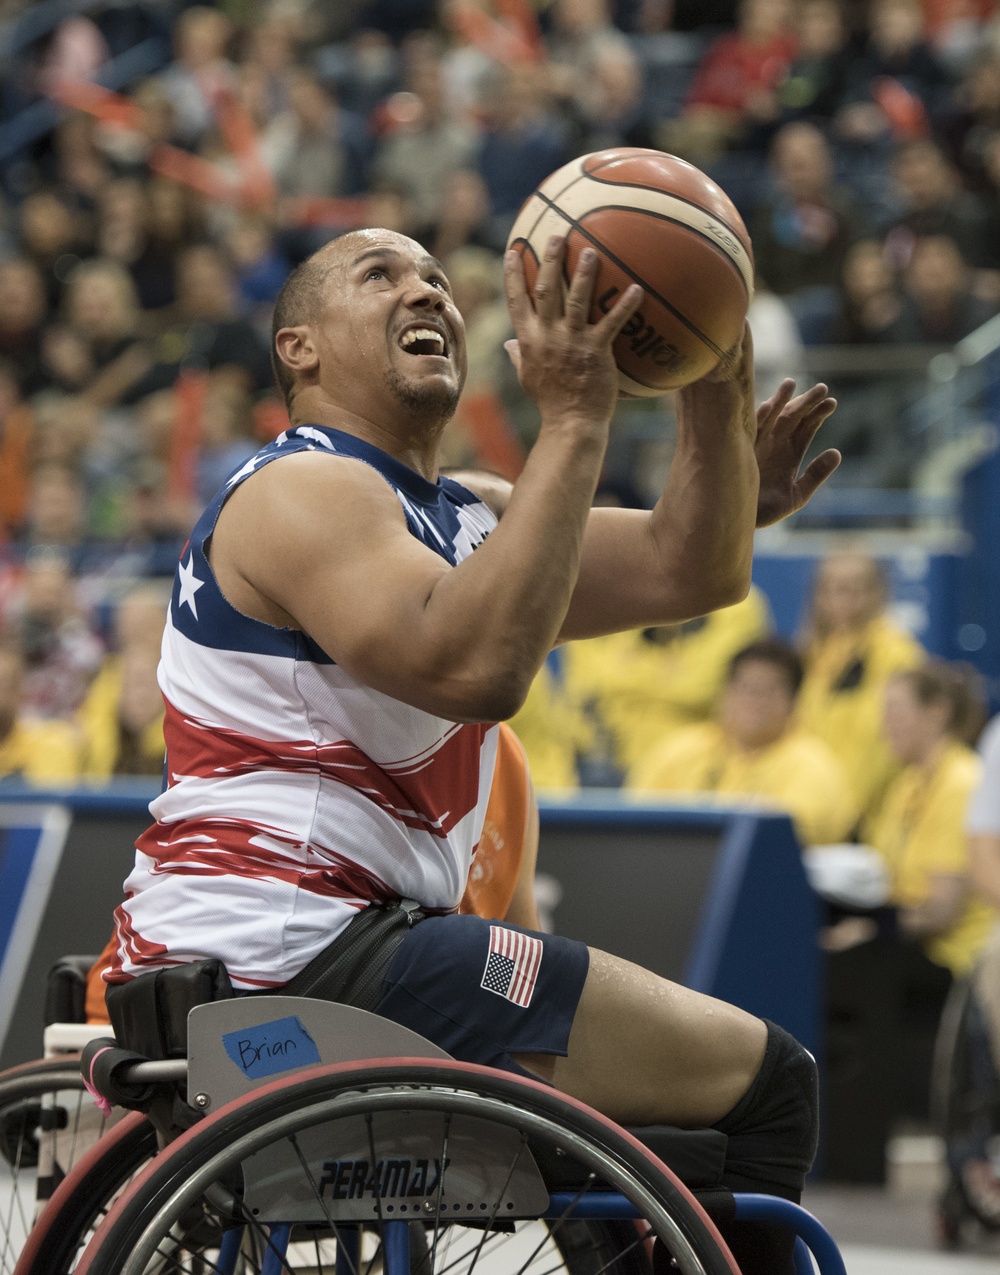 Wheelchair Basketball Gold at Invictus Games 2017